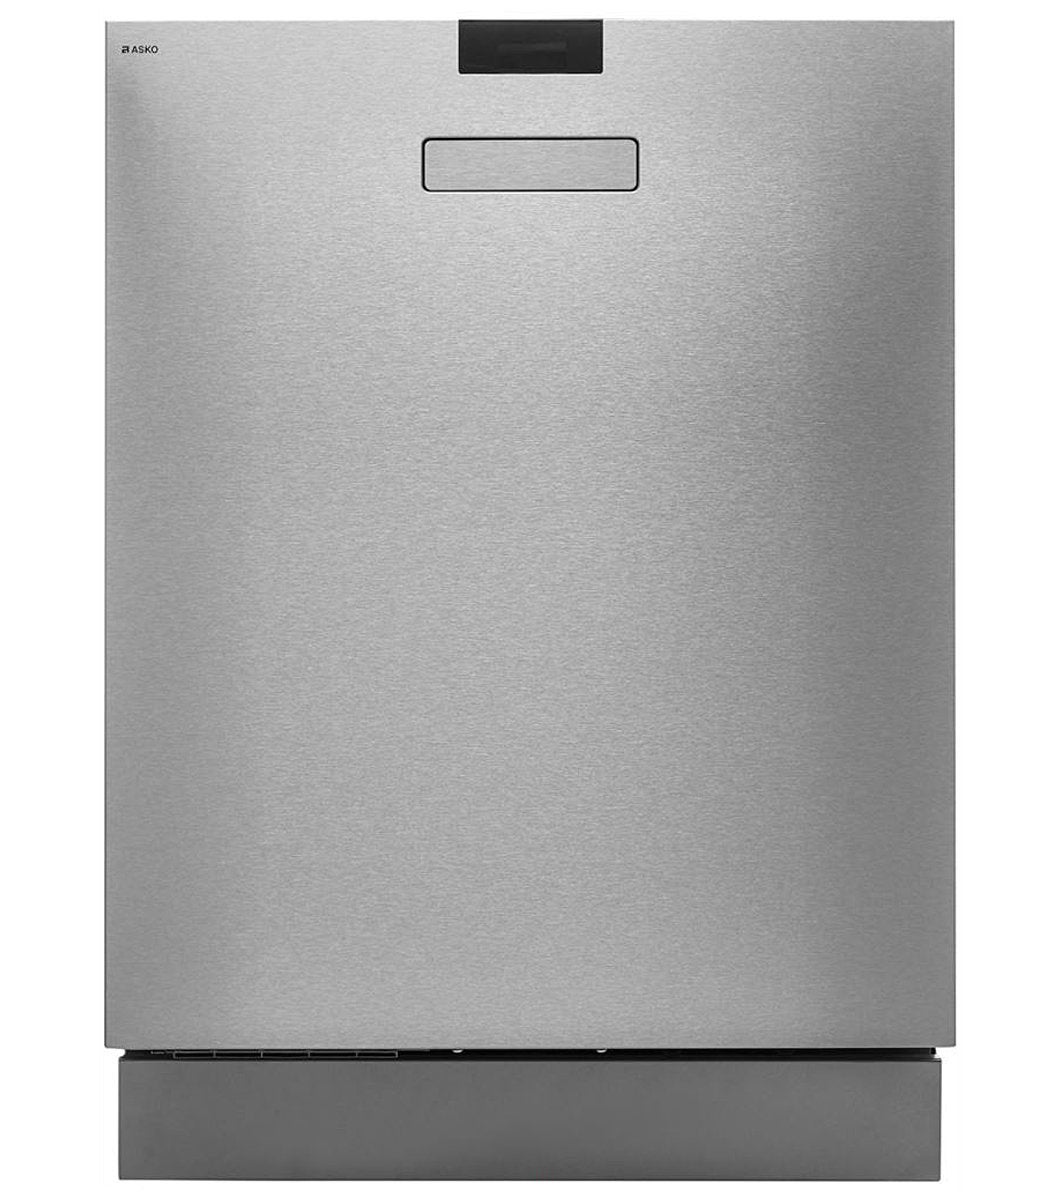 Best Dishwashers Brand Reviews & Ratings Canstar Blue